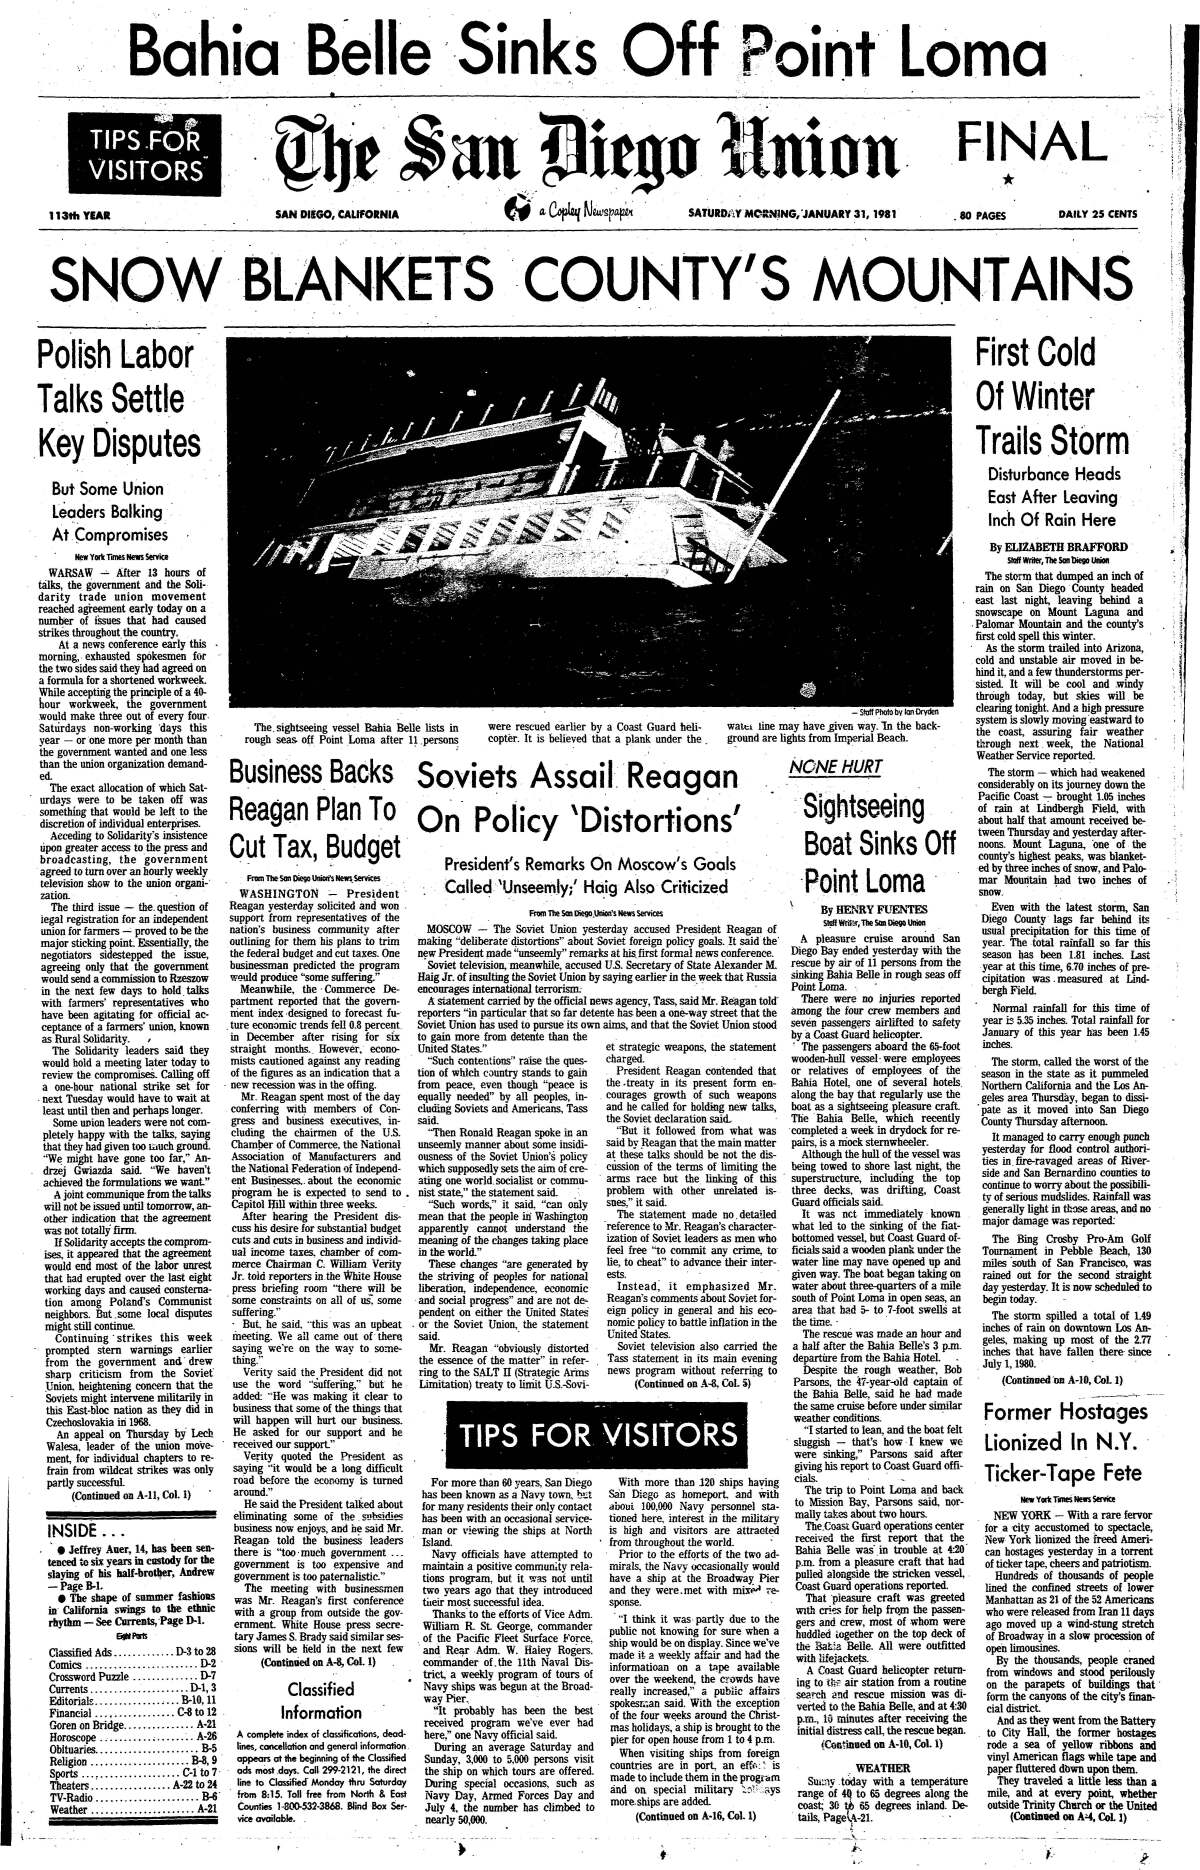 Jan. 31, 1981 Union front page